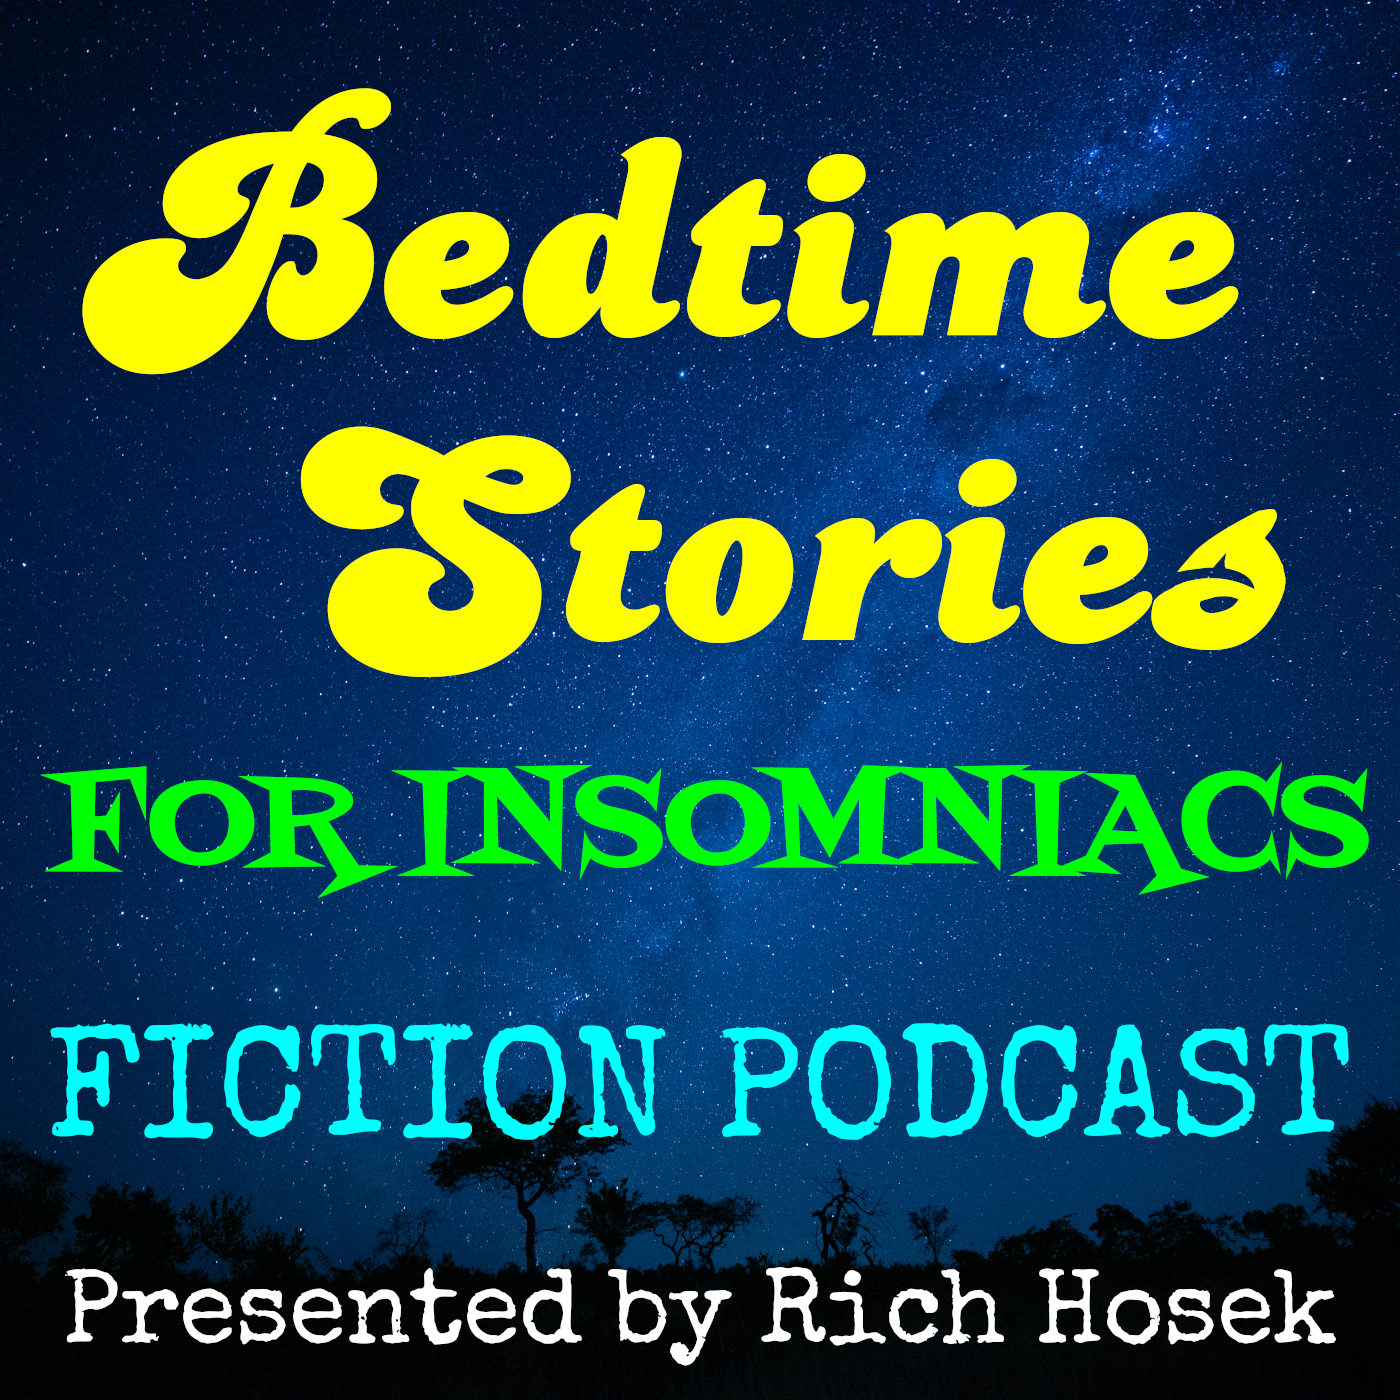 Bedtime Stories for Insomniacs - Presented by Rich Hosek